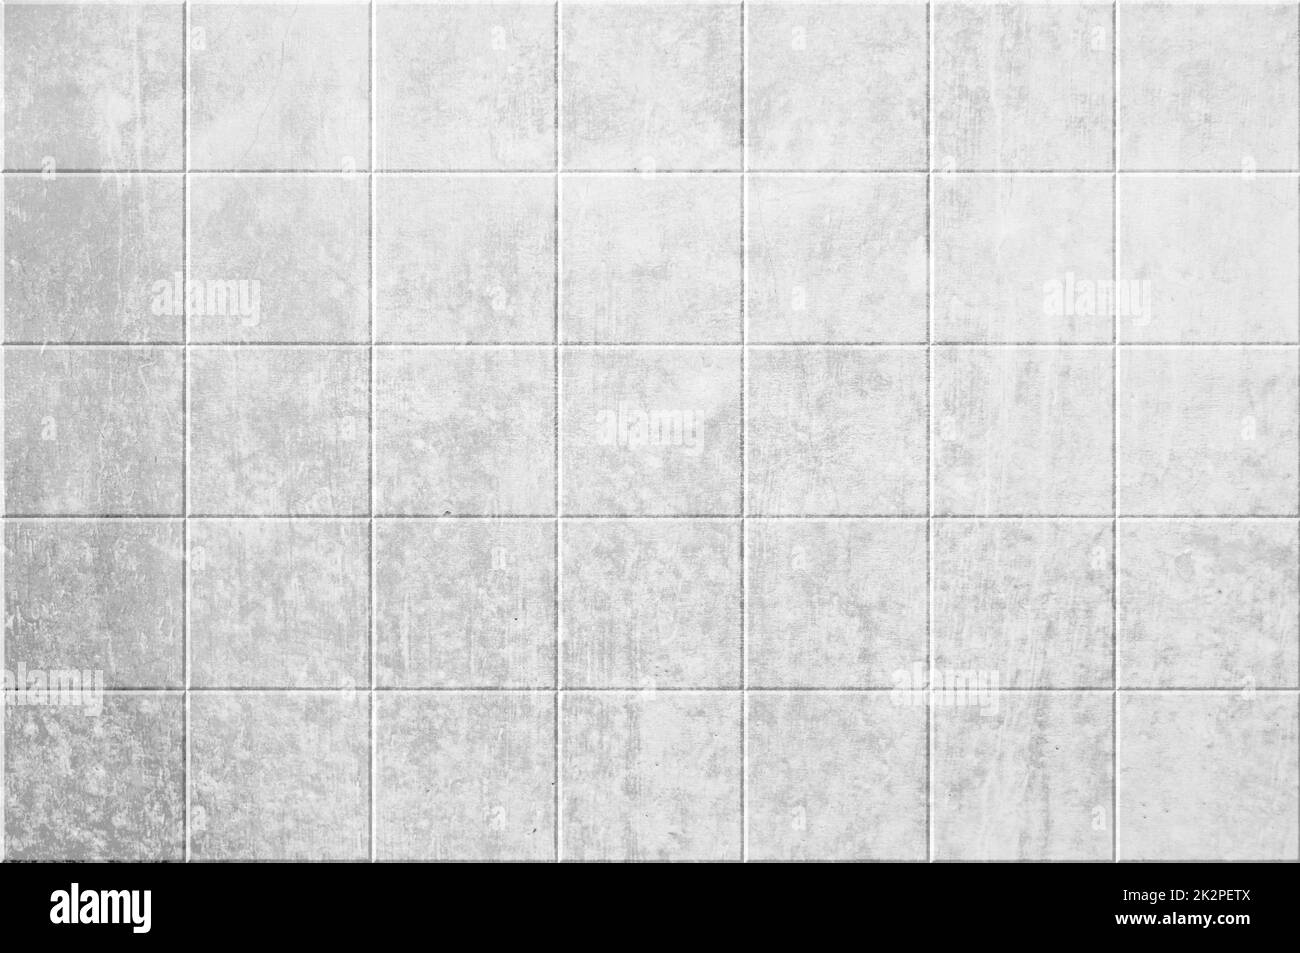 Dirty white gray wall with tiles Stock Photo